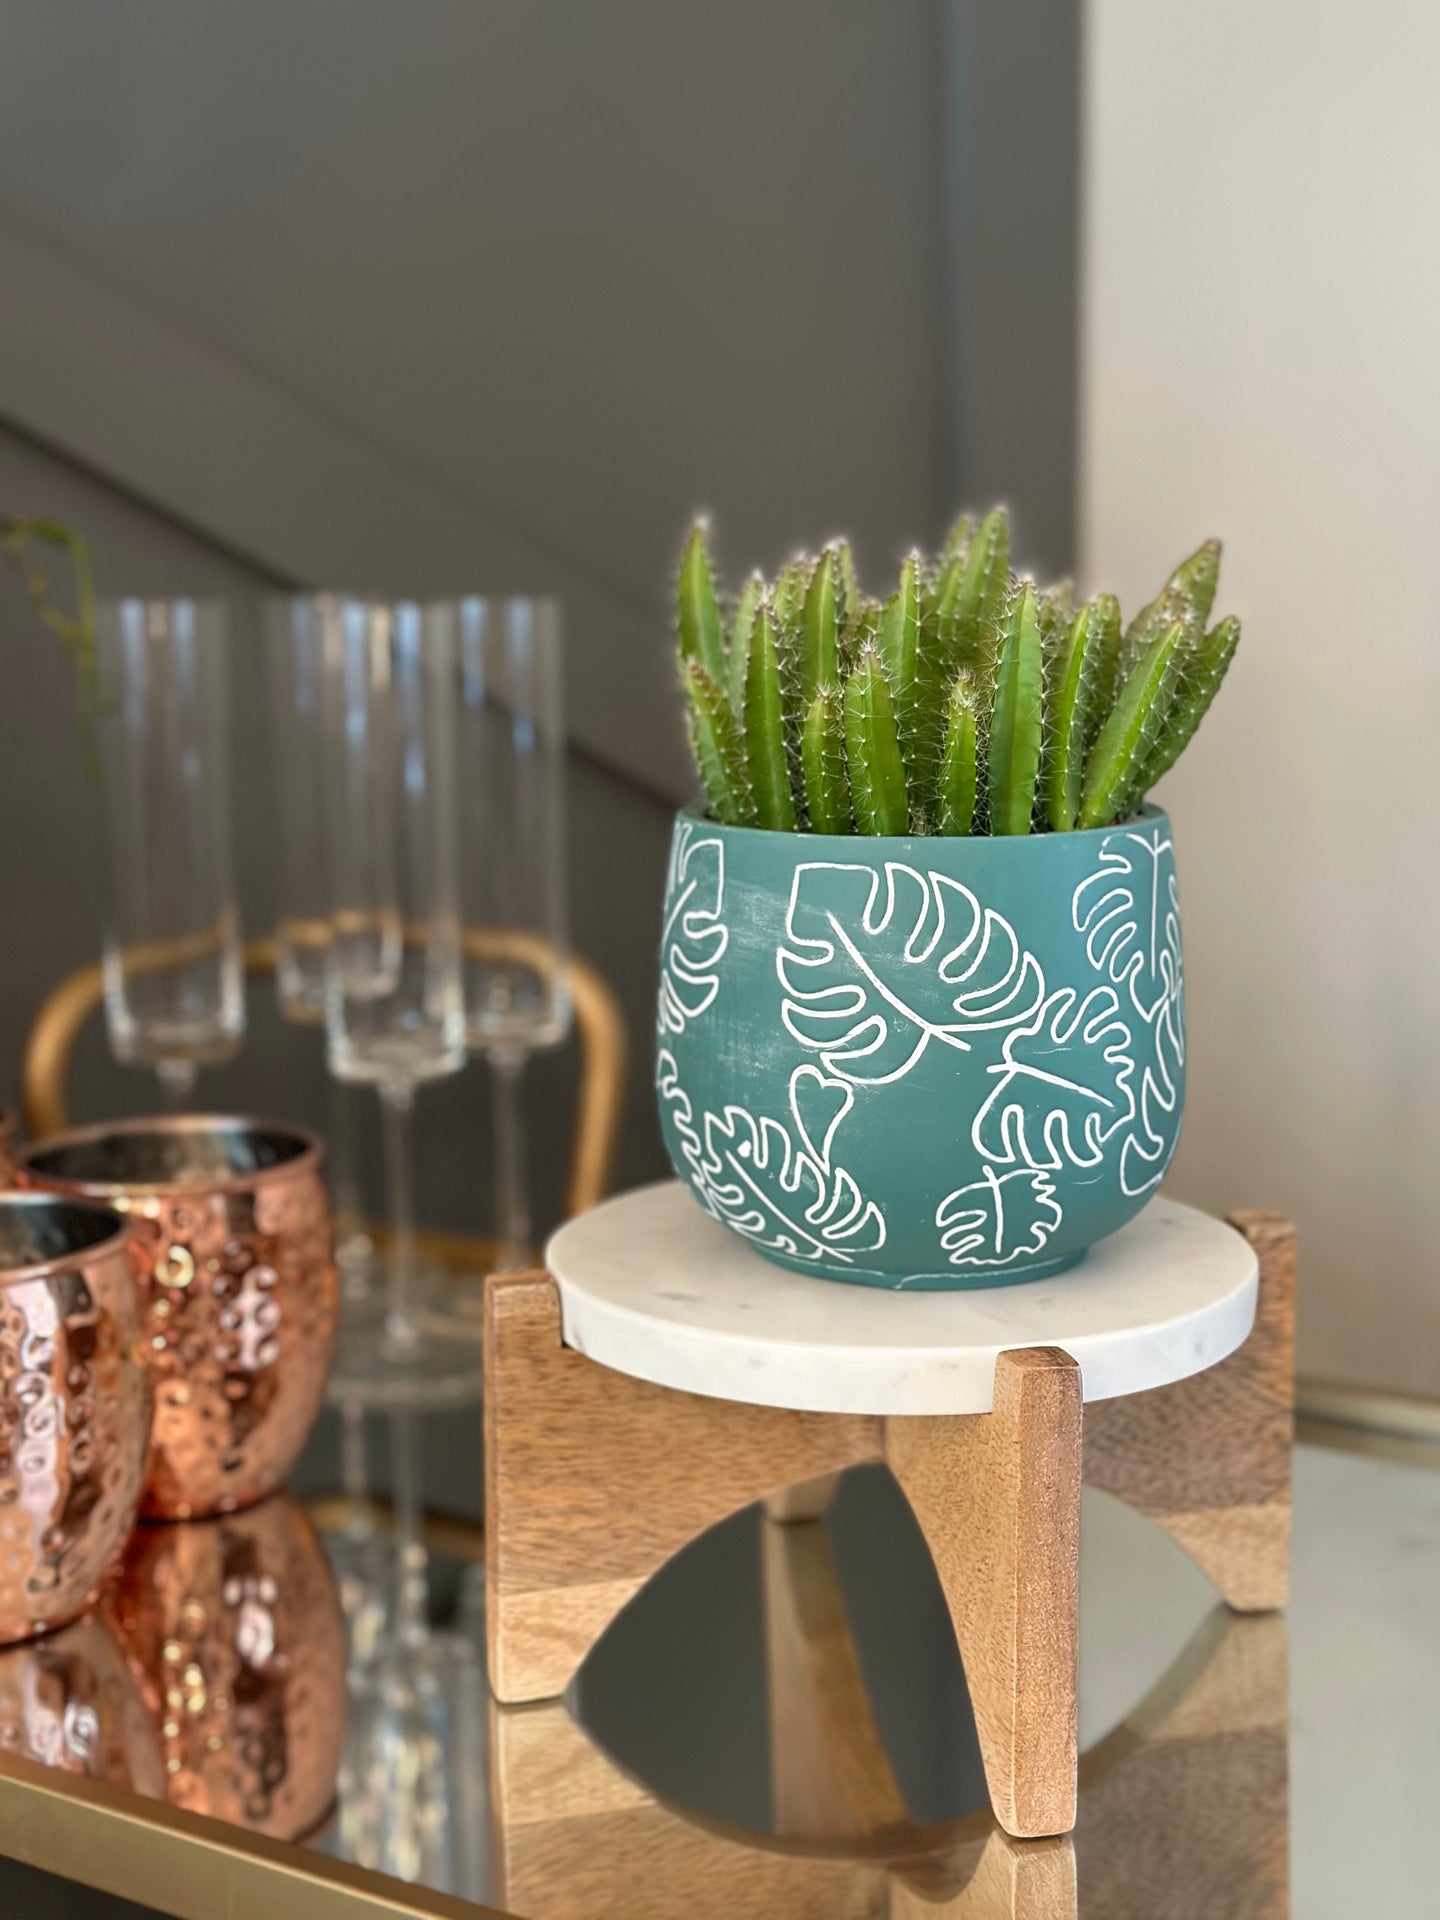 A white marble and acacia wood display stand styled with a small cactus in a teal planter